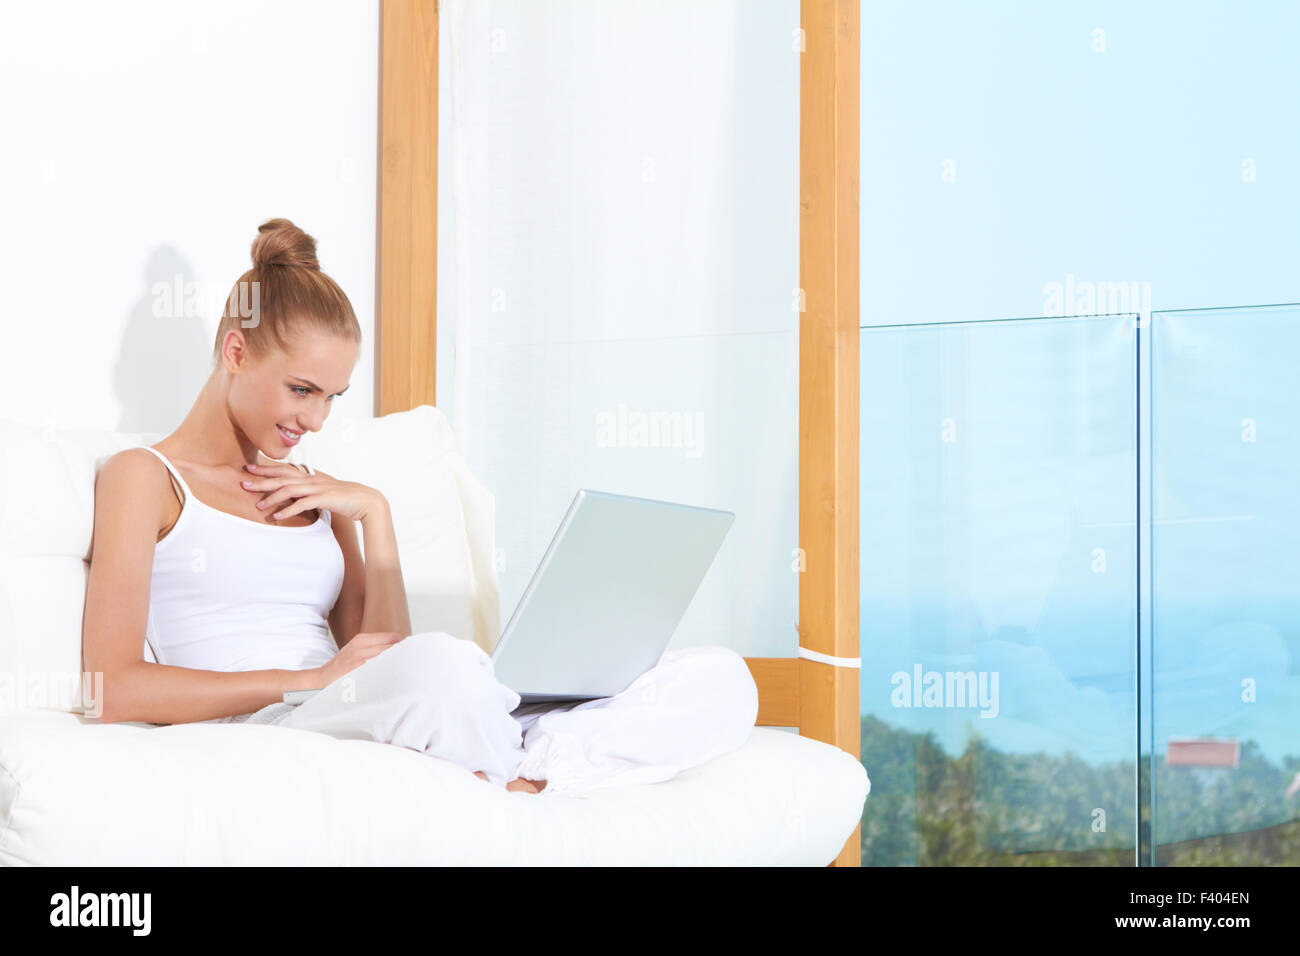 Smiling Woman Chatting on Laptop at Couch Stock Photo